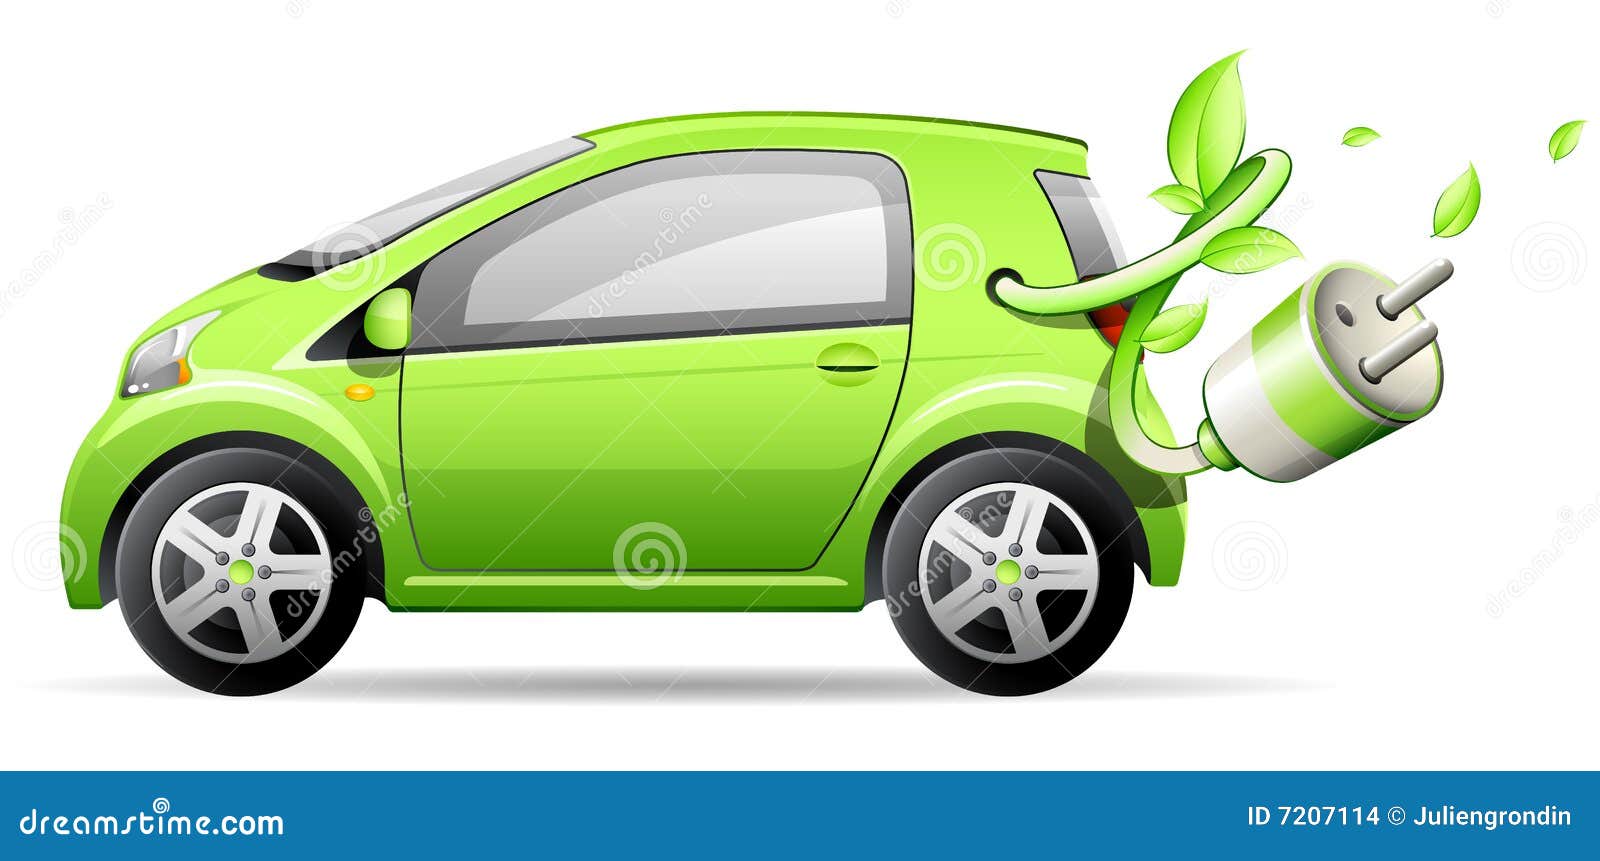 Karnataka is the First Indian State to Approve e-vehicle Policy